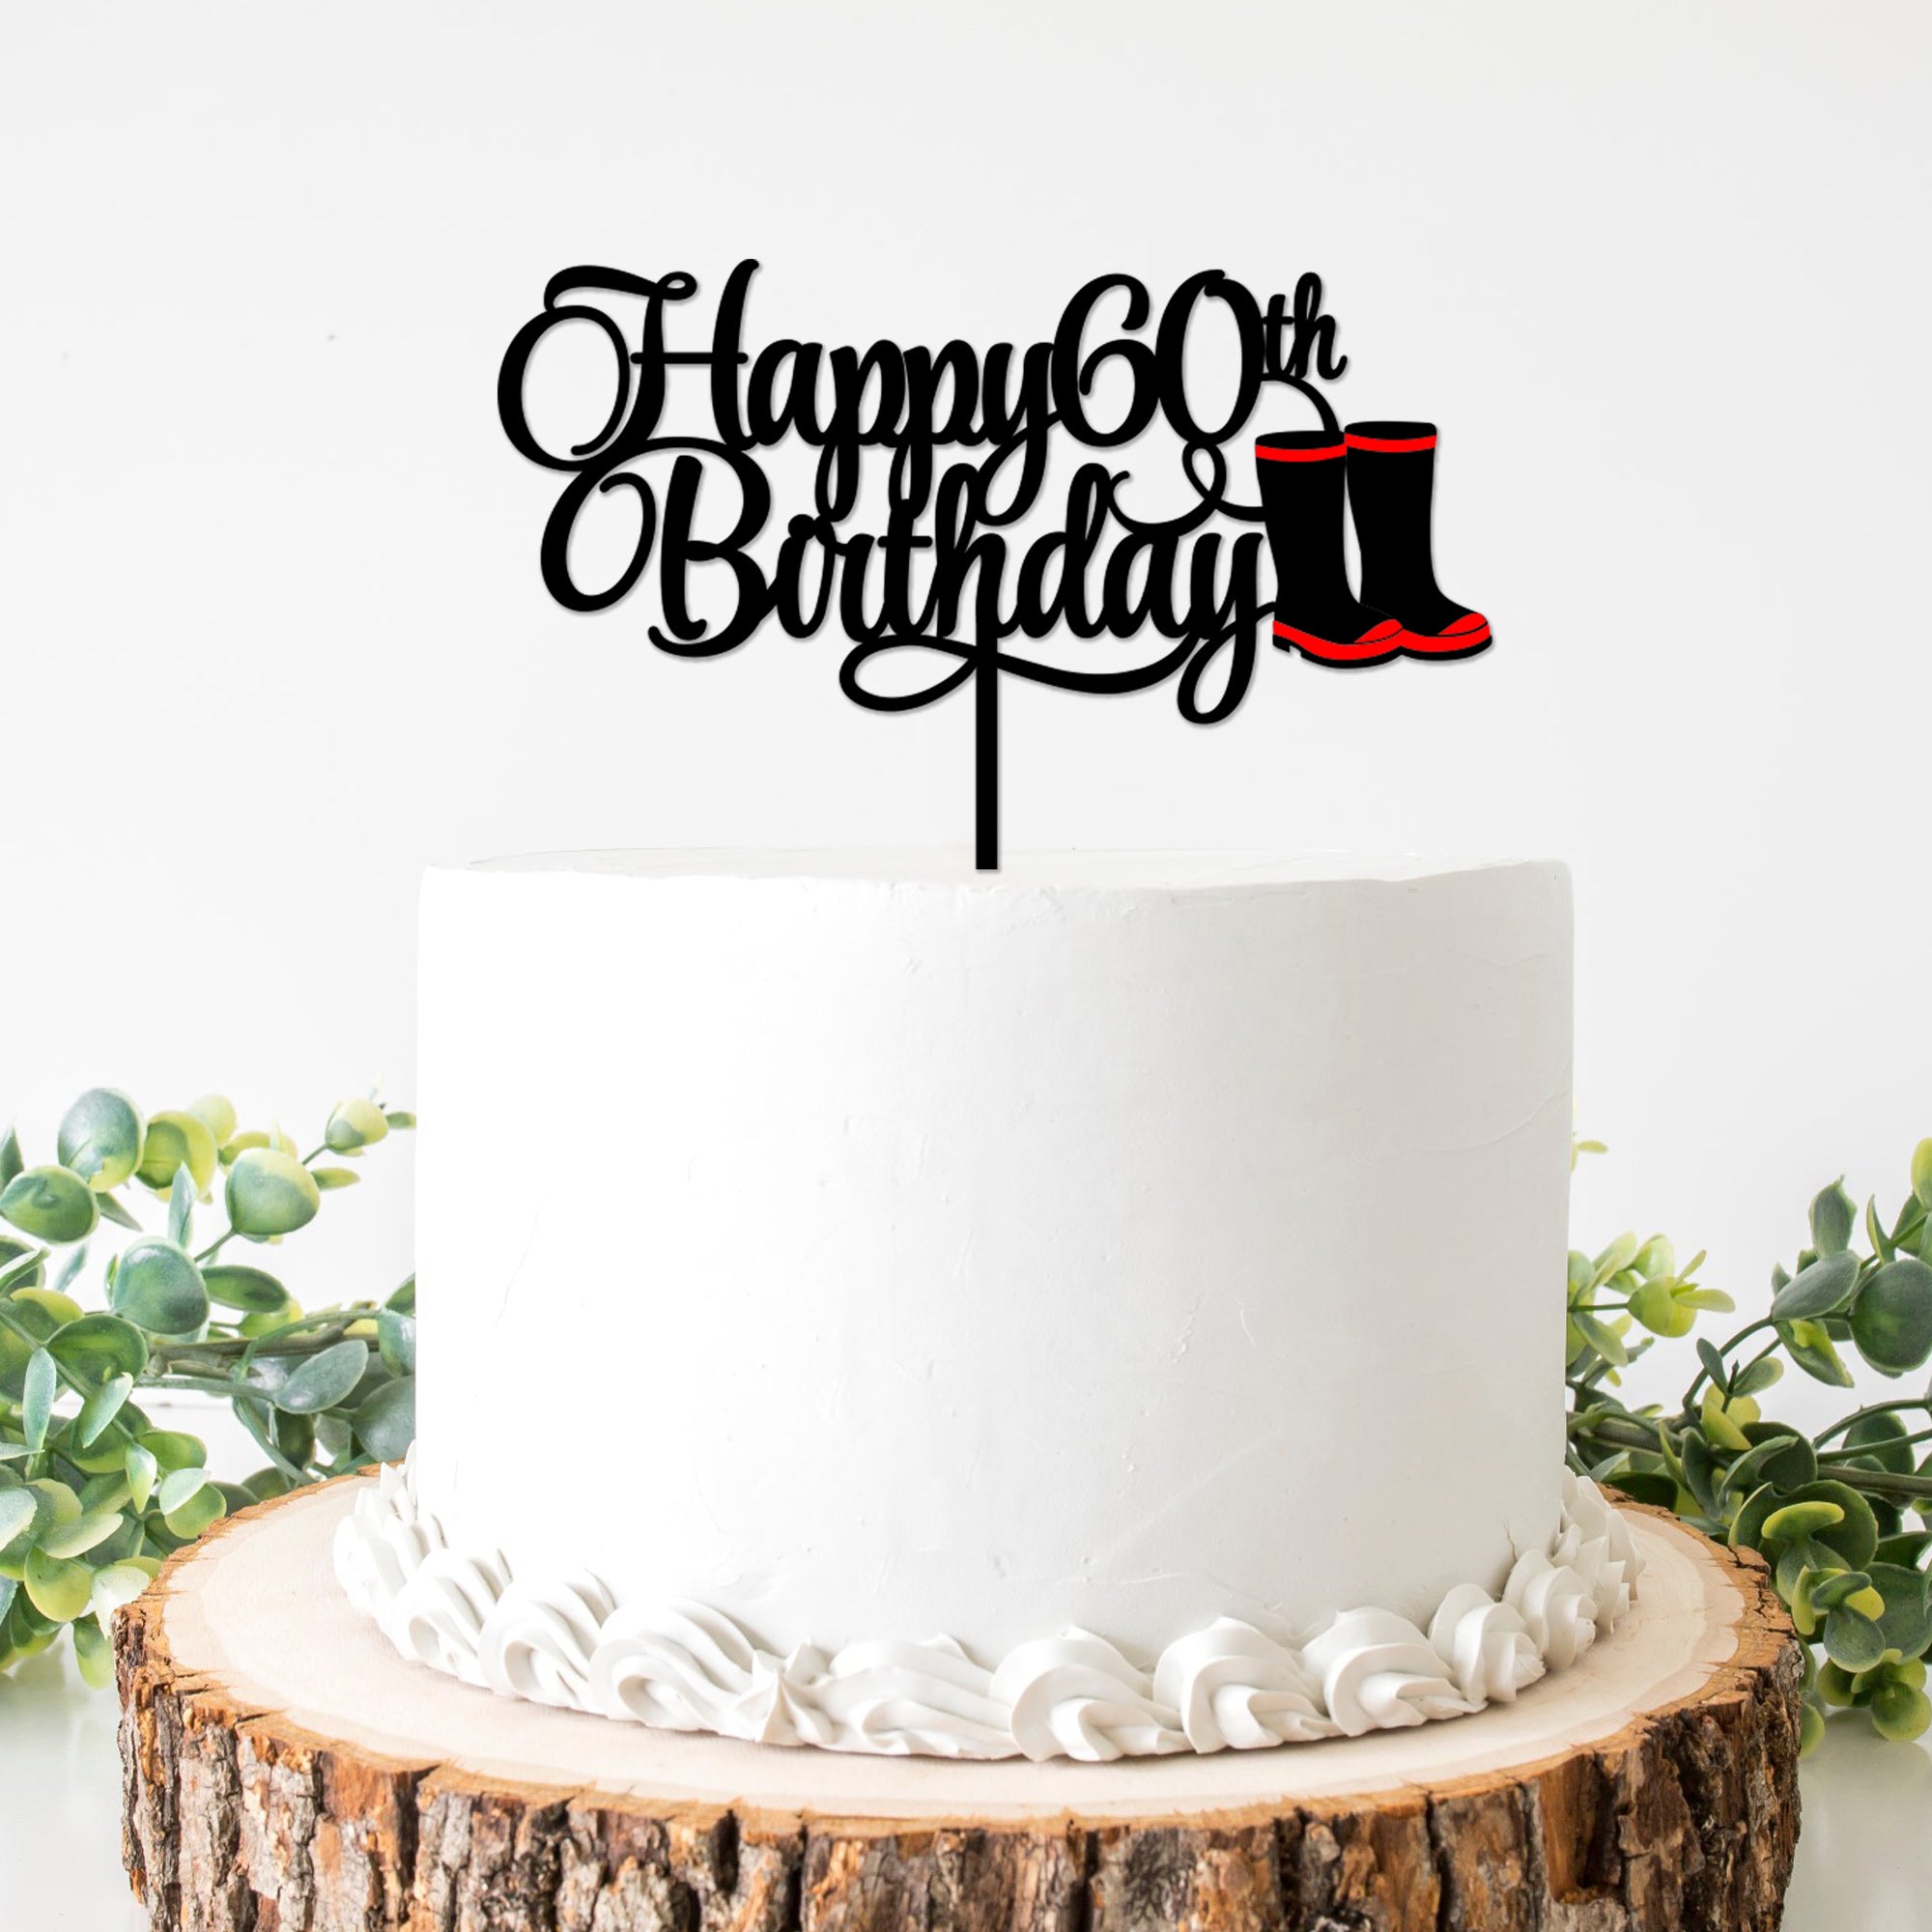 Happy 60th Birthday Cake Topper featuring Redband Gumboots